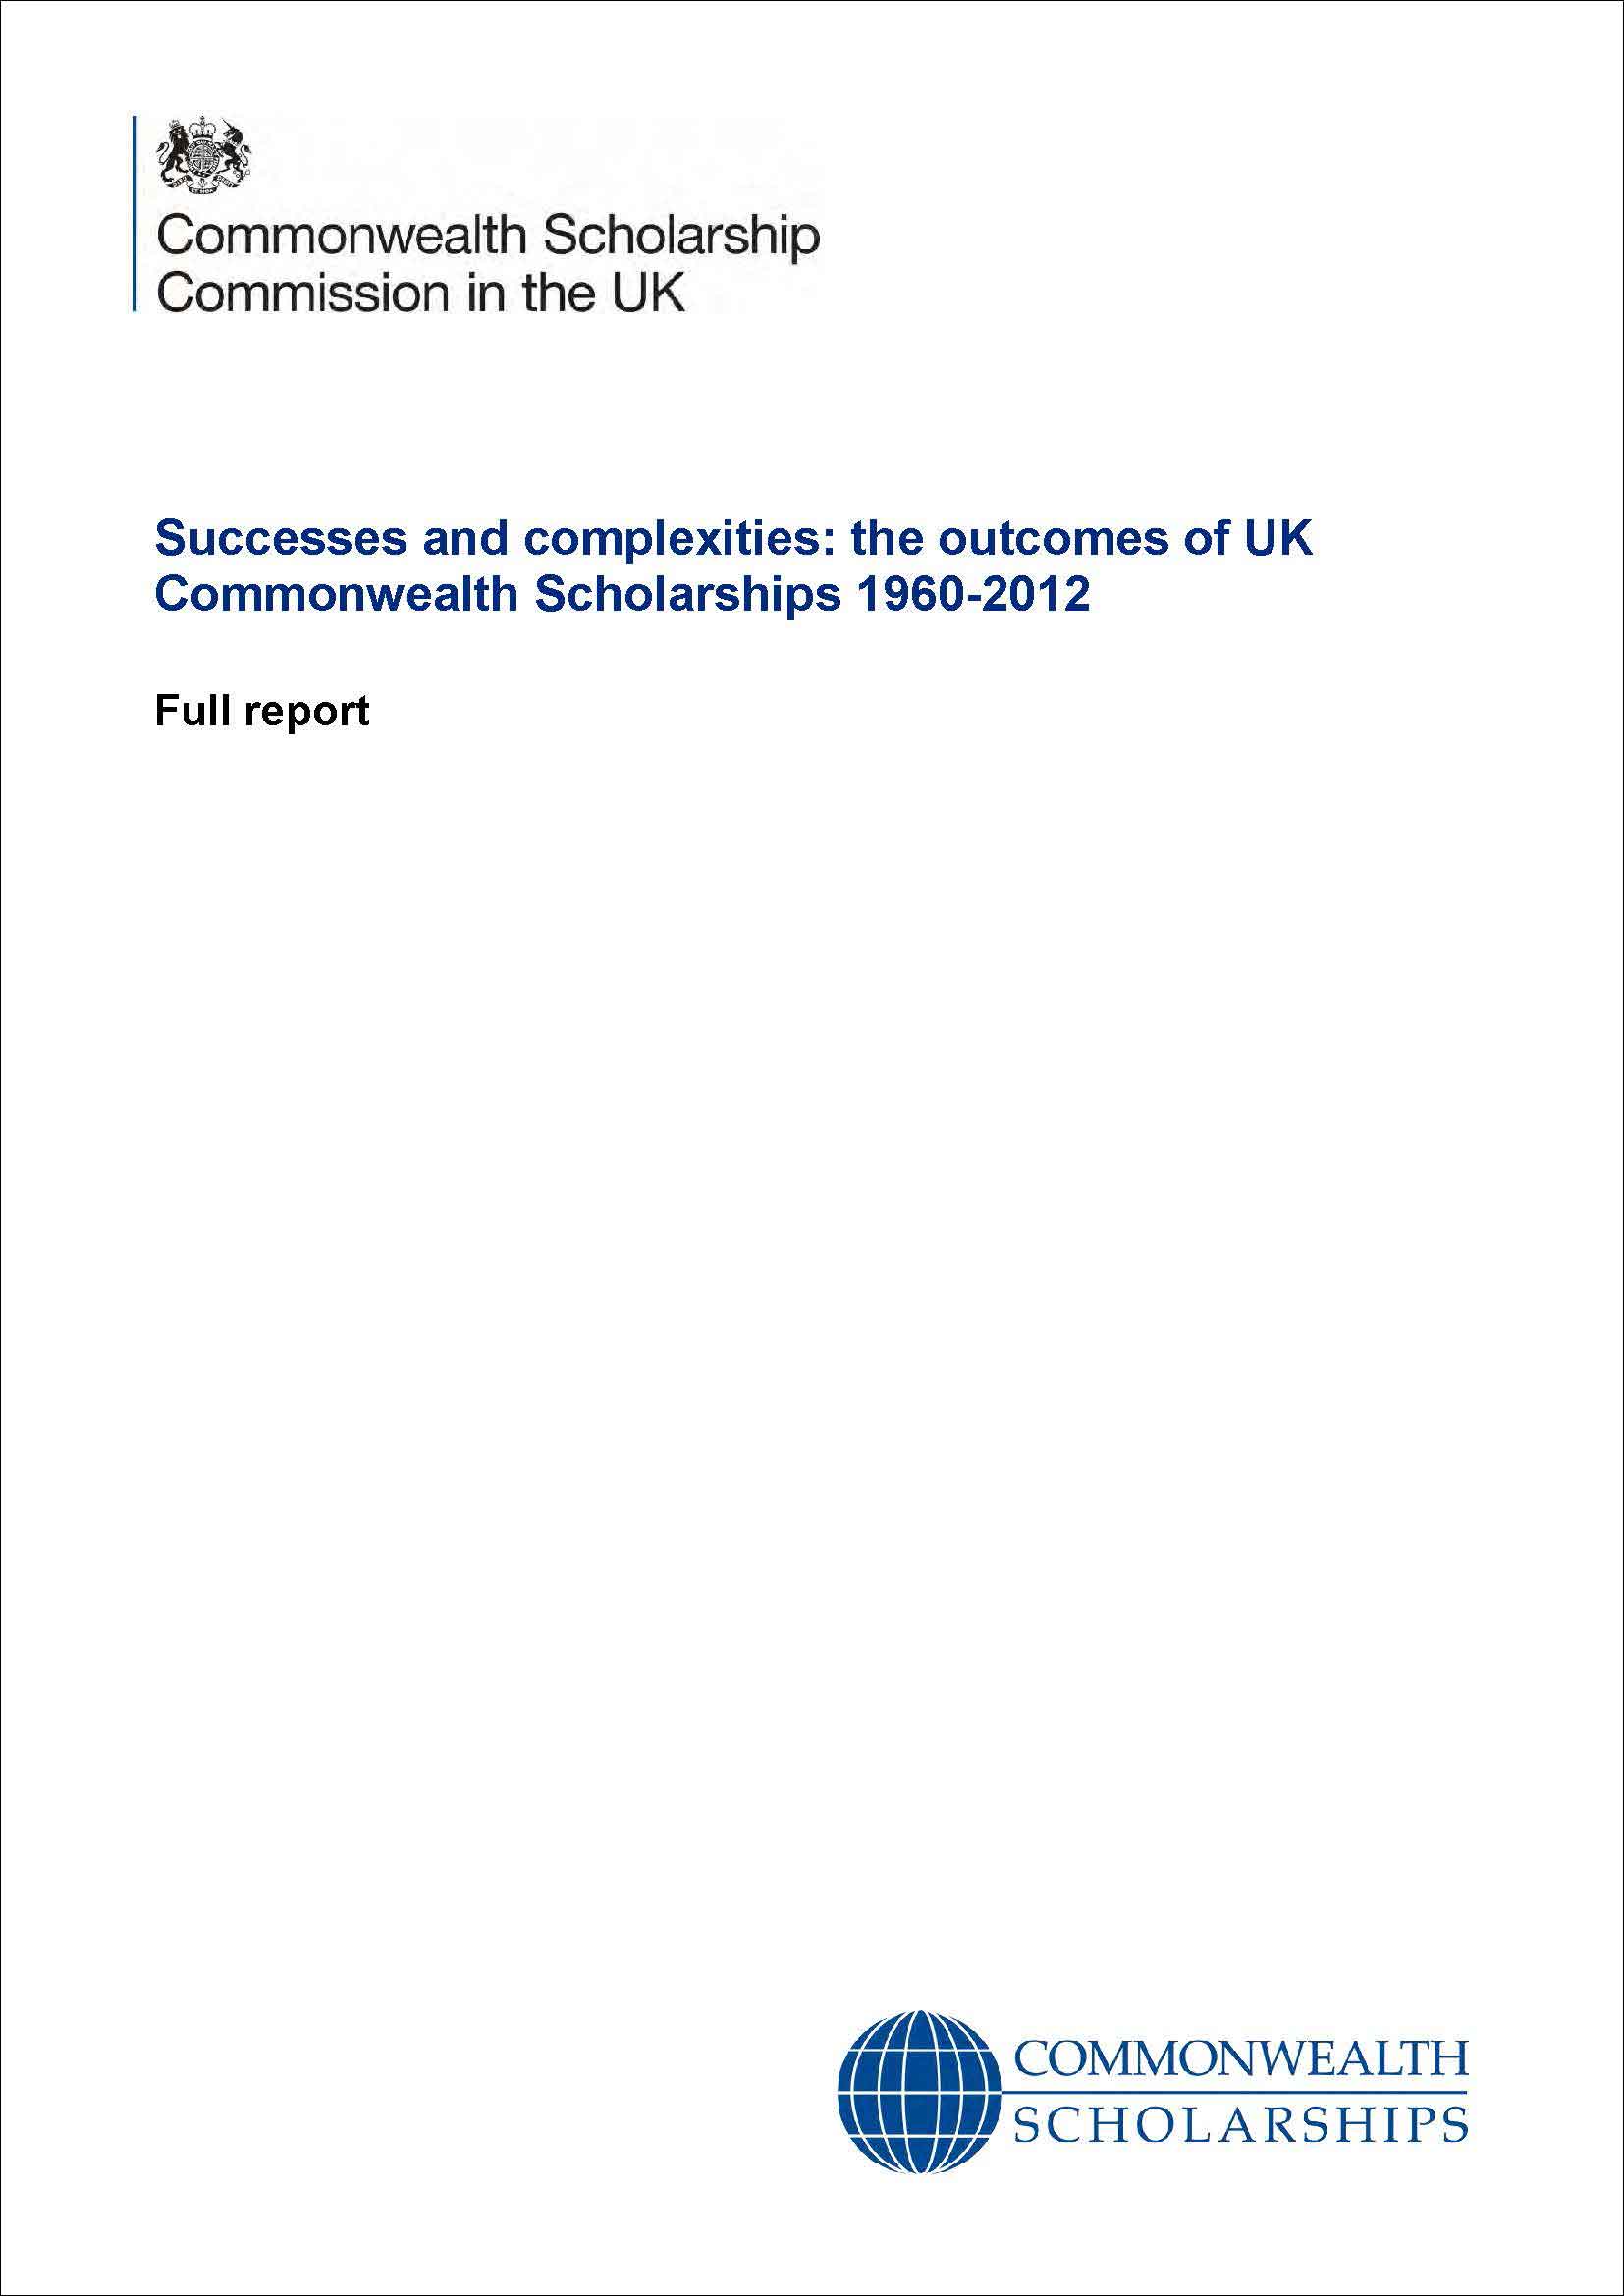 Successes and complexities: the outcomes of UK Commonwealth Scholarships 1960-2012